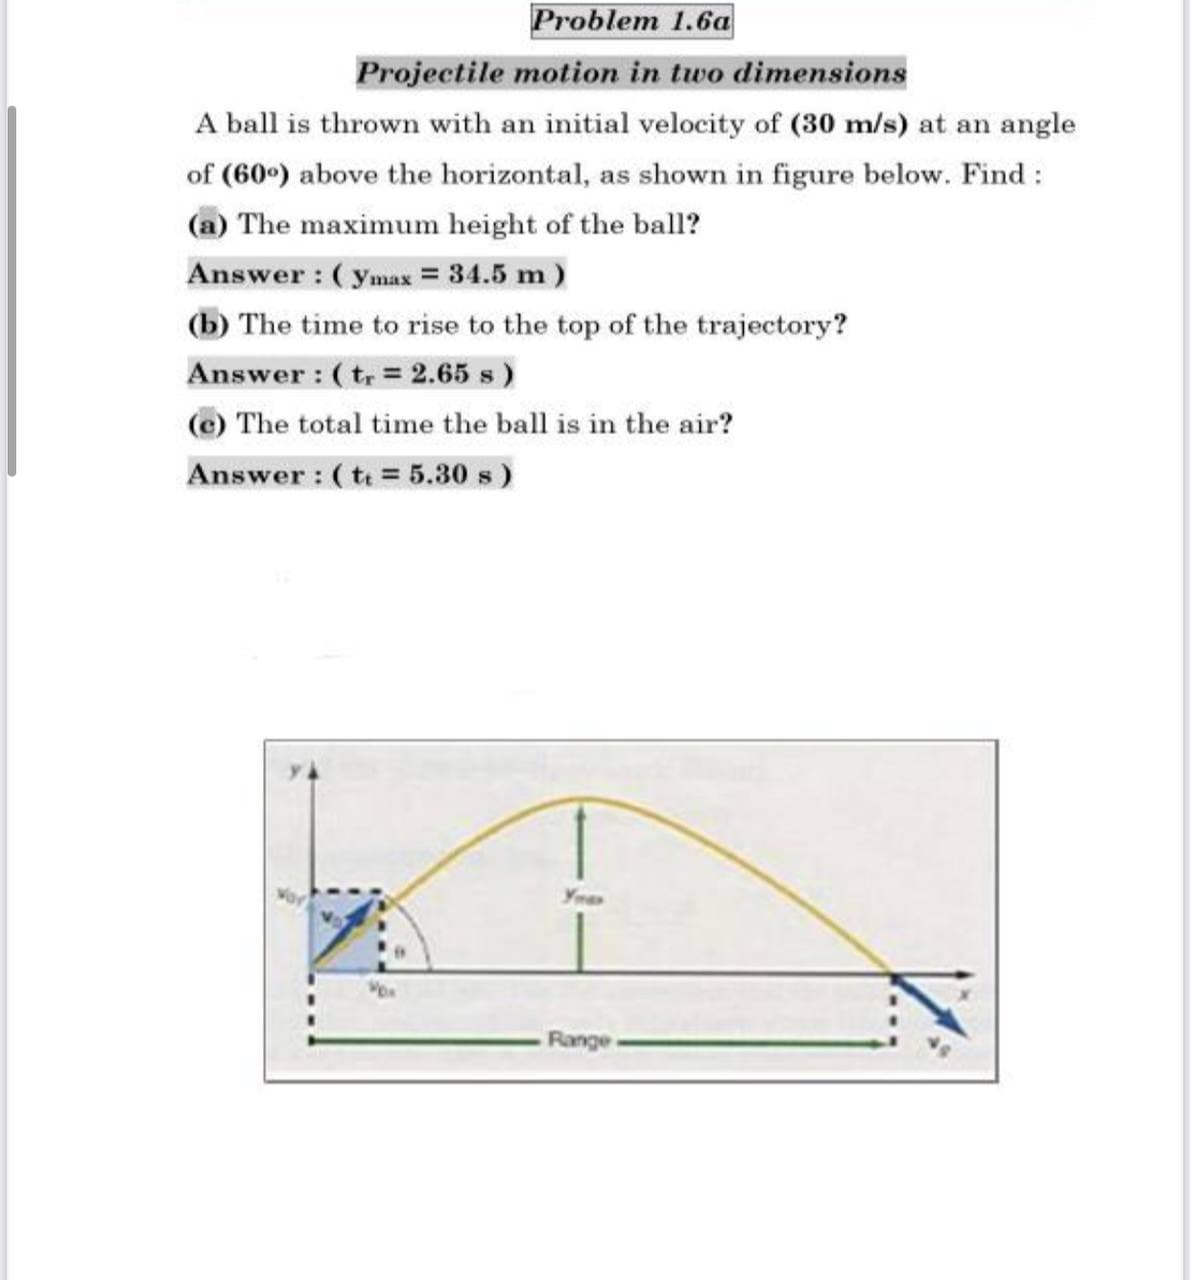 Problem 1.6a
Projectile motion in two dimensions
A ball is thrown with an initial velocity of (30 m/s) at an angle
of (60°) above the horizontal, as shown in figure below. Find :
(a) The maximum height of the ball?
Answer : ( ymax = 34.5 m )
(b) The time to rise to the top of the trajectory?
Answer : ( t = 2.65 s )
(e) The total time the ball is in the air?
Answer : (t = 5.30 s)
Ymas
-Range
